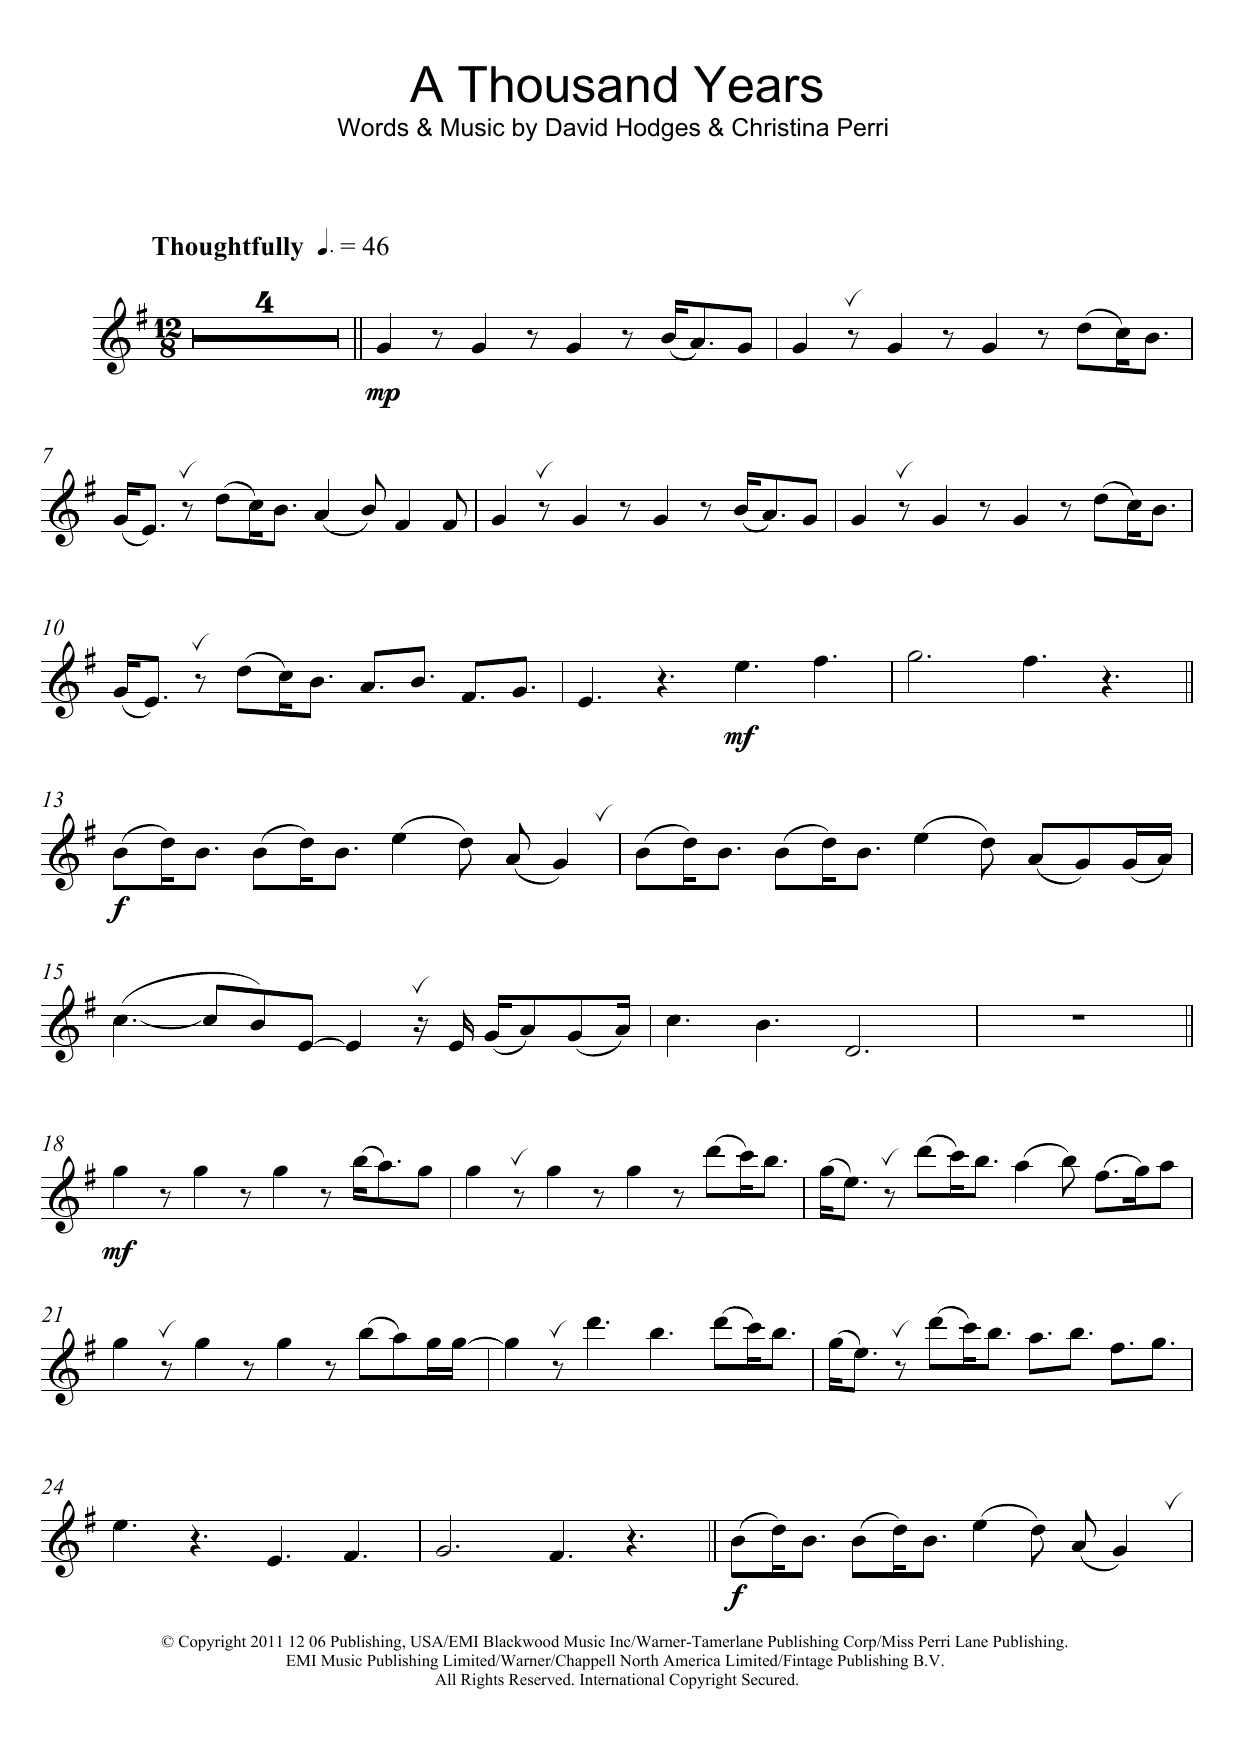 A Thousand Years Sheet Music By Christina Perri For Piano Keyboard And Voice Noteflight Marketplace